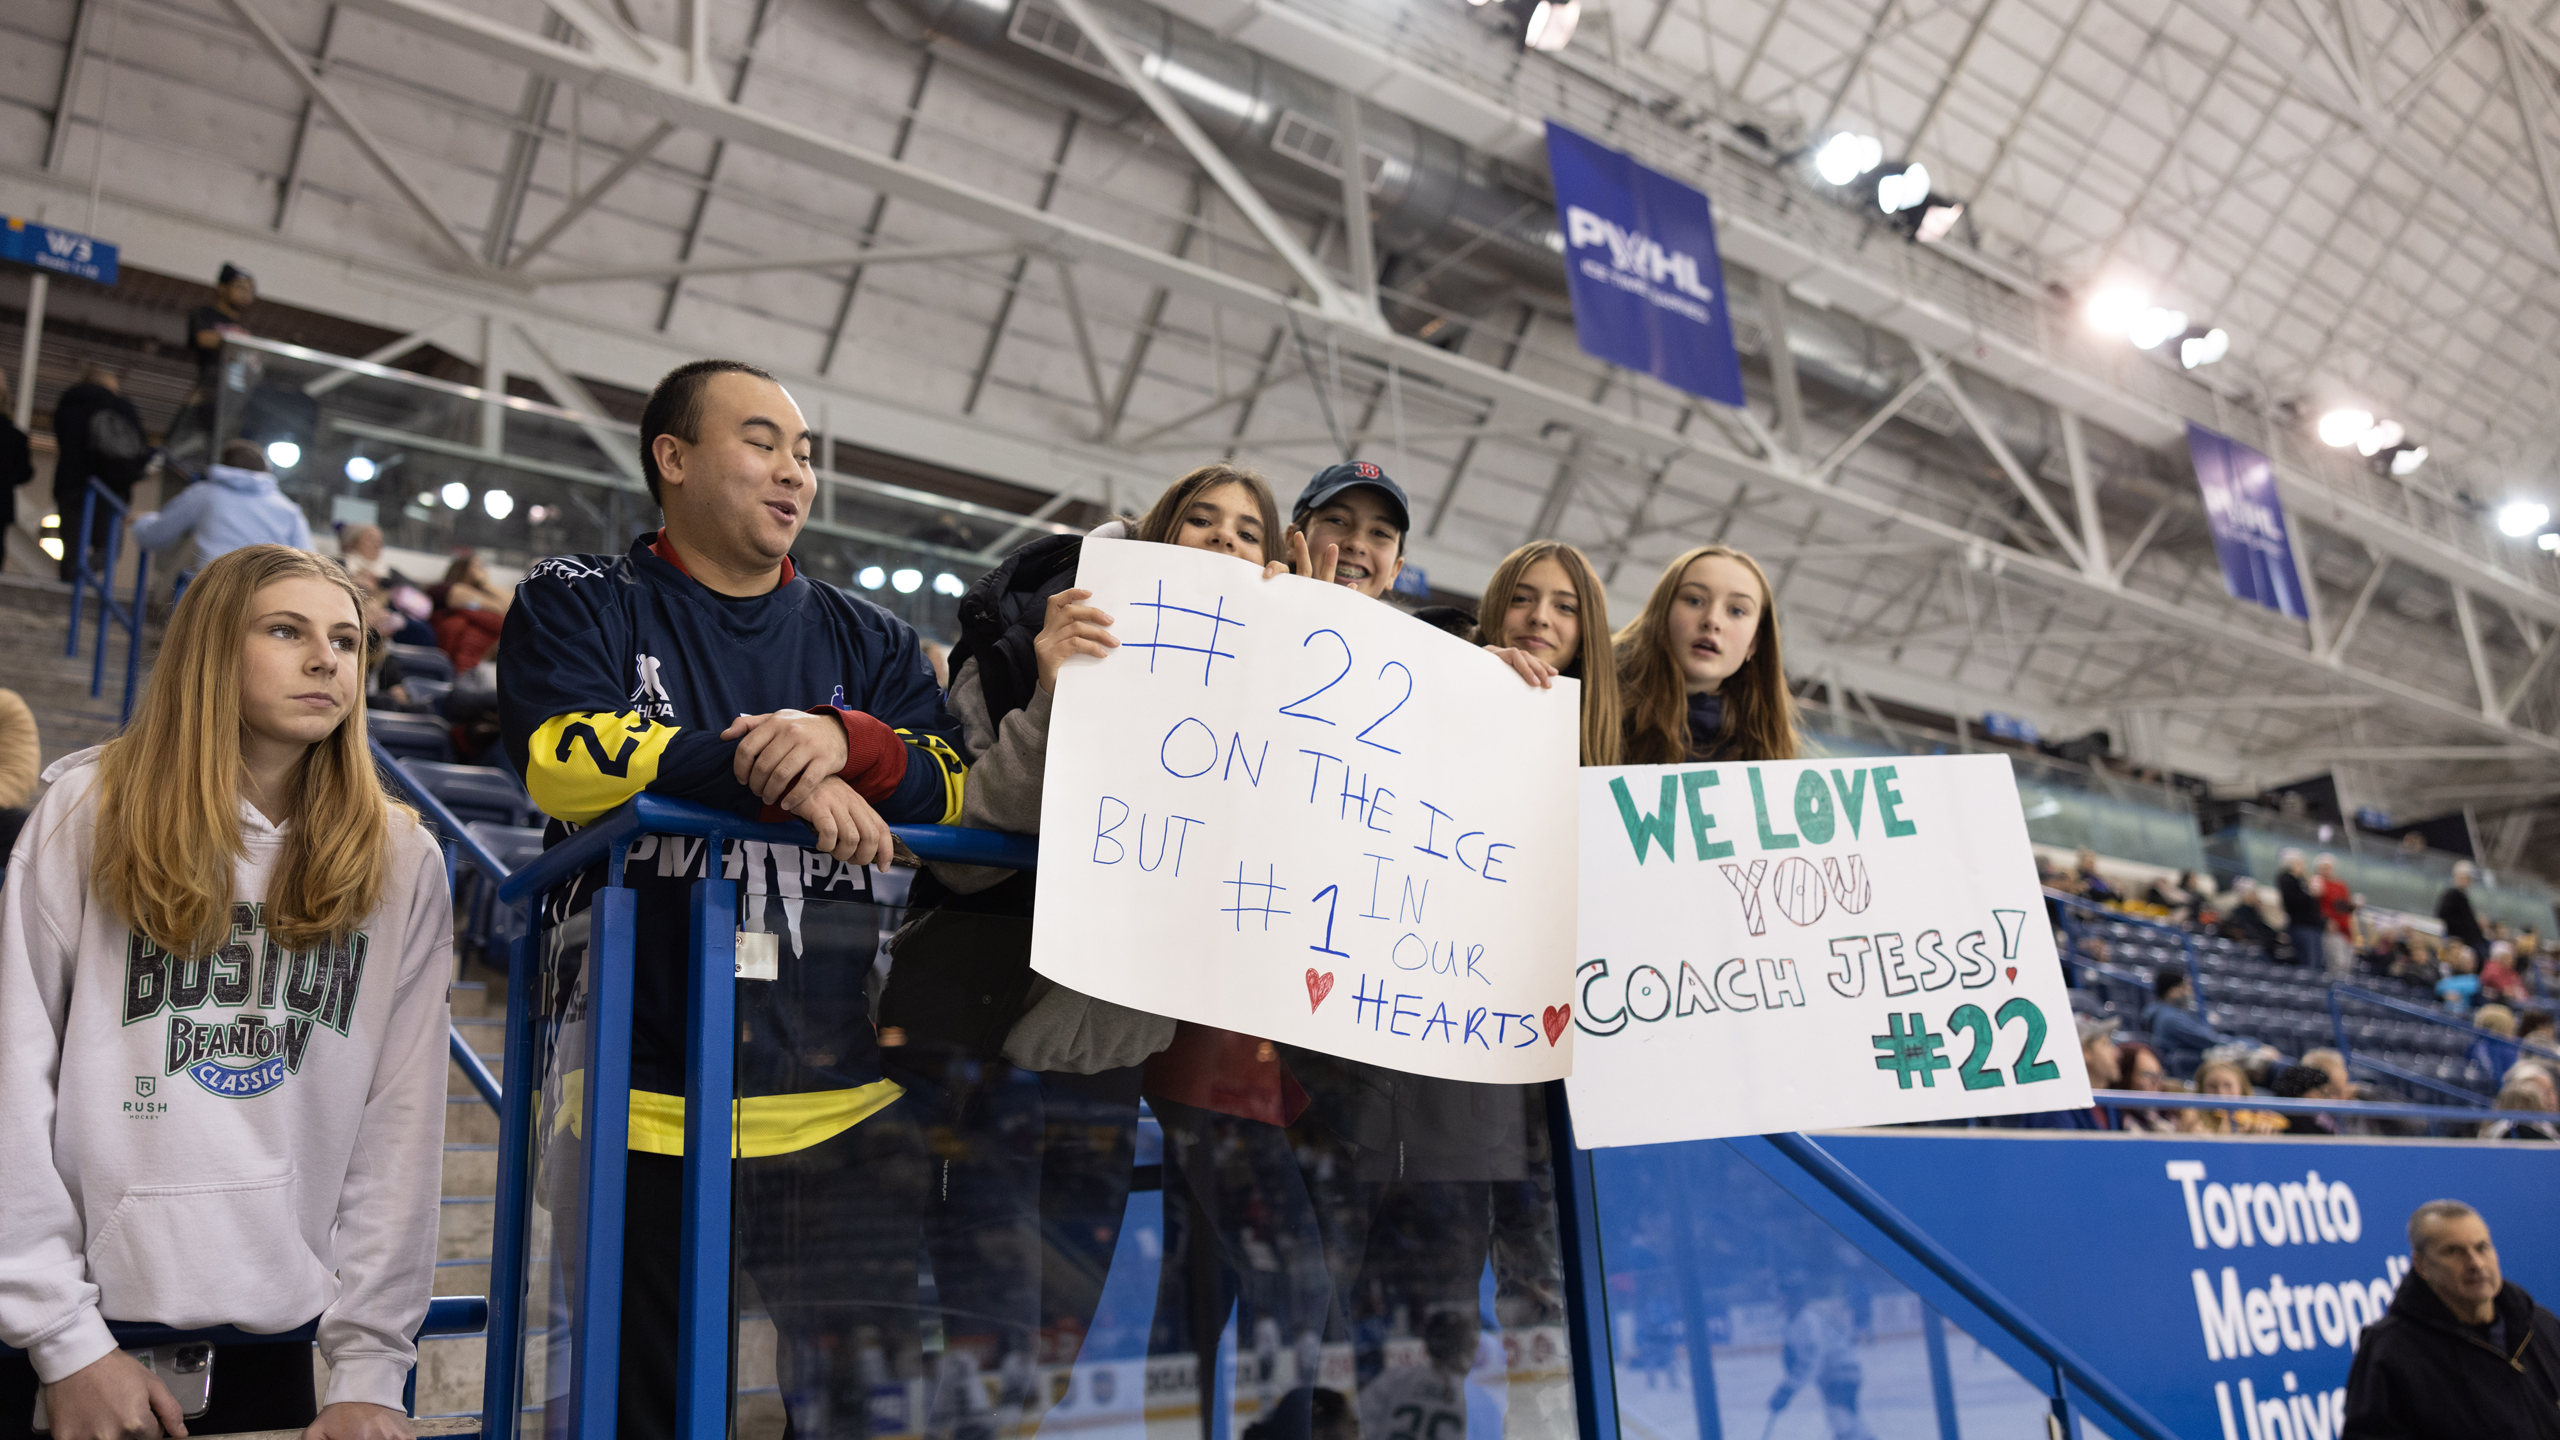 Fans hold up two signs. The first says #22 on the ice but #1 in our hearts. The second sign says "We love you coach Jess #22"